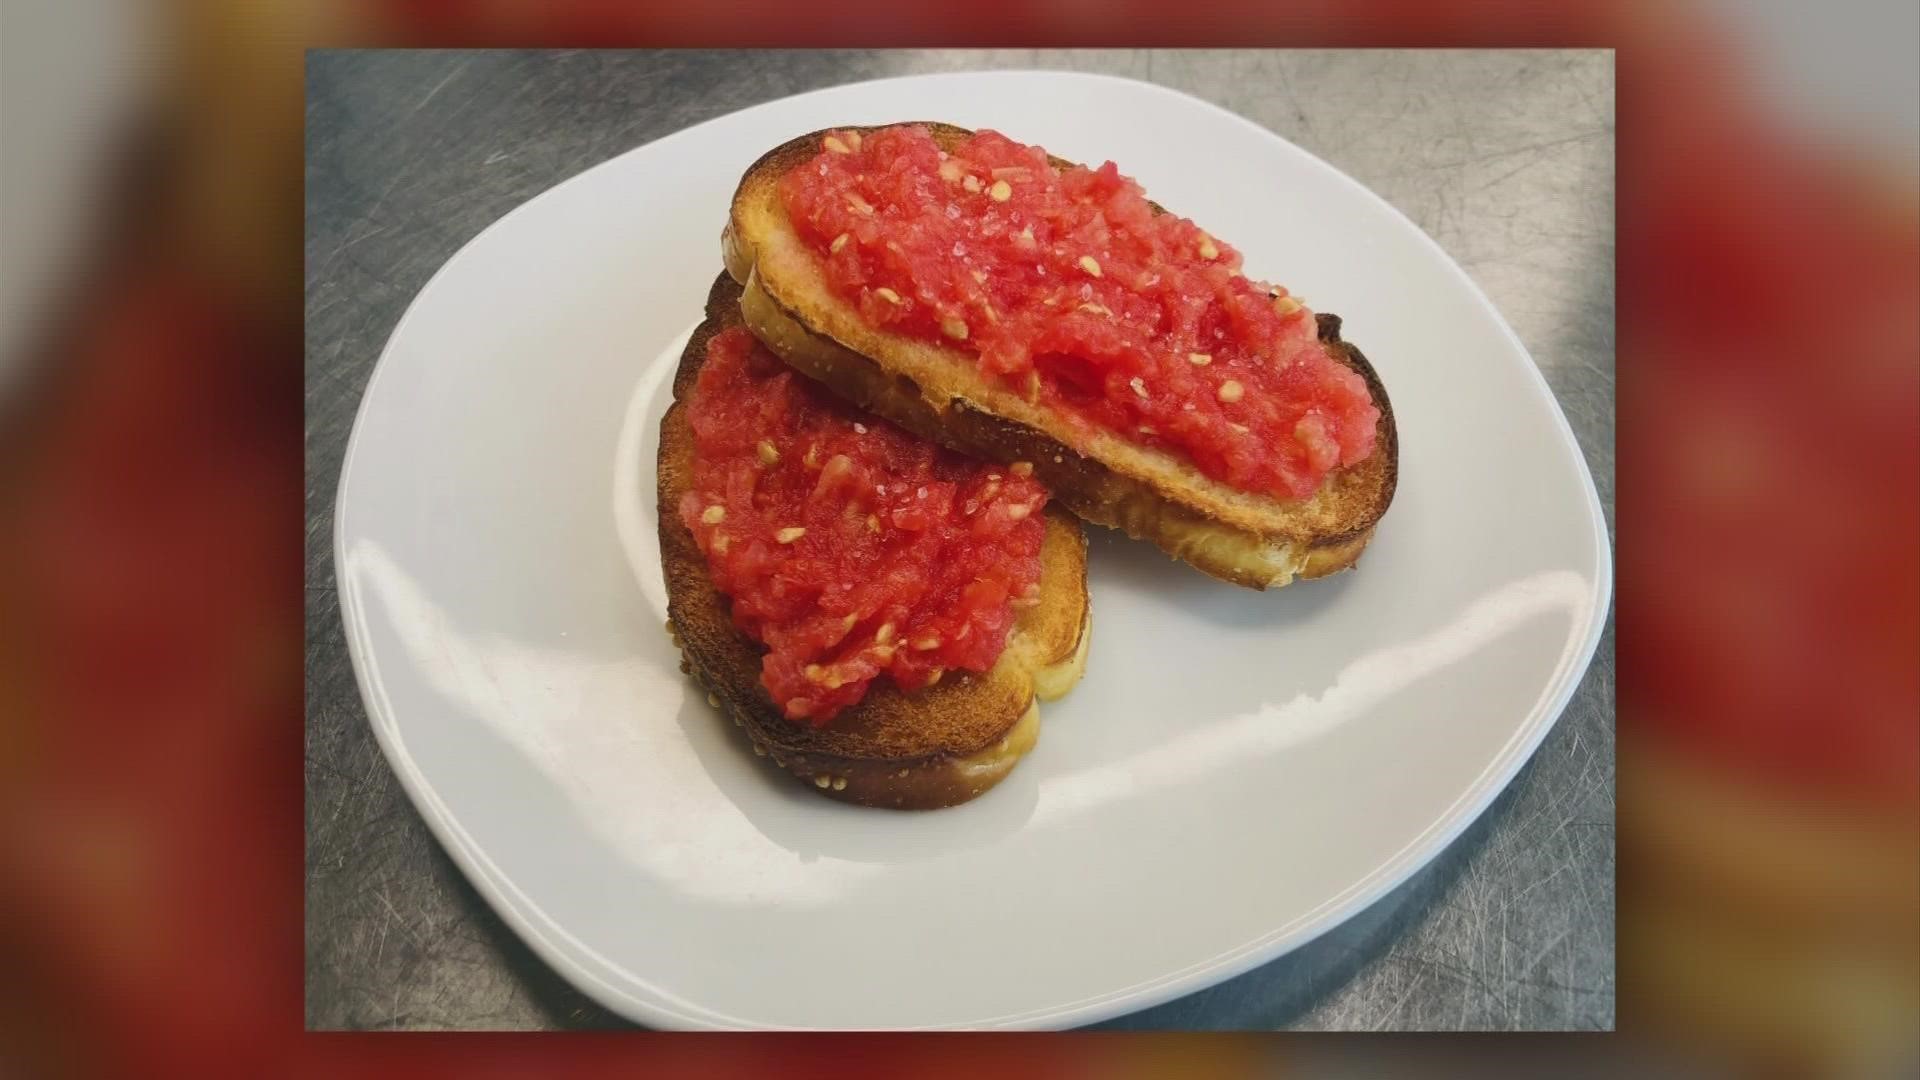 This recipe is a delicious way to use up those few extra tomatoes you have on hand.